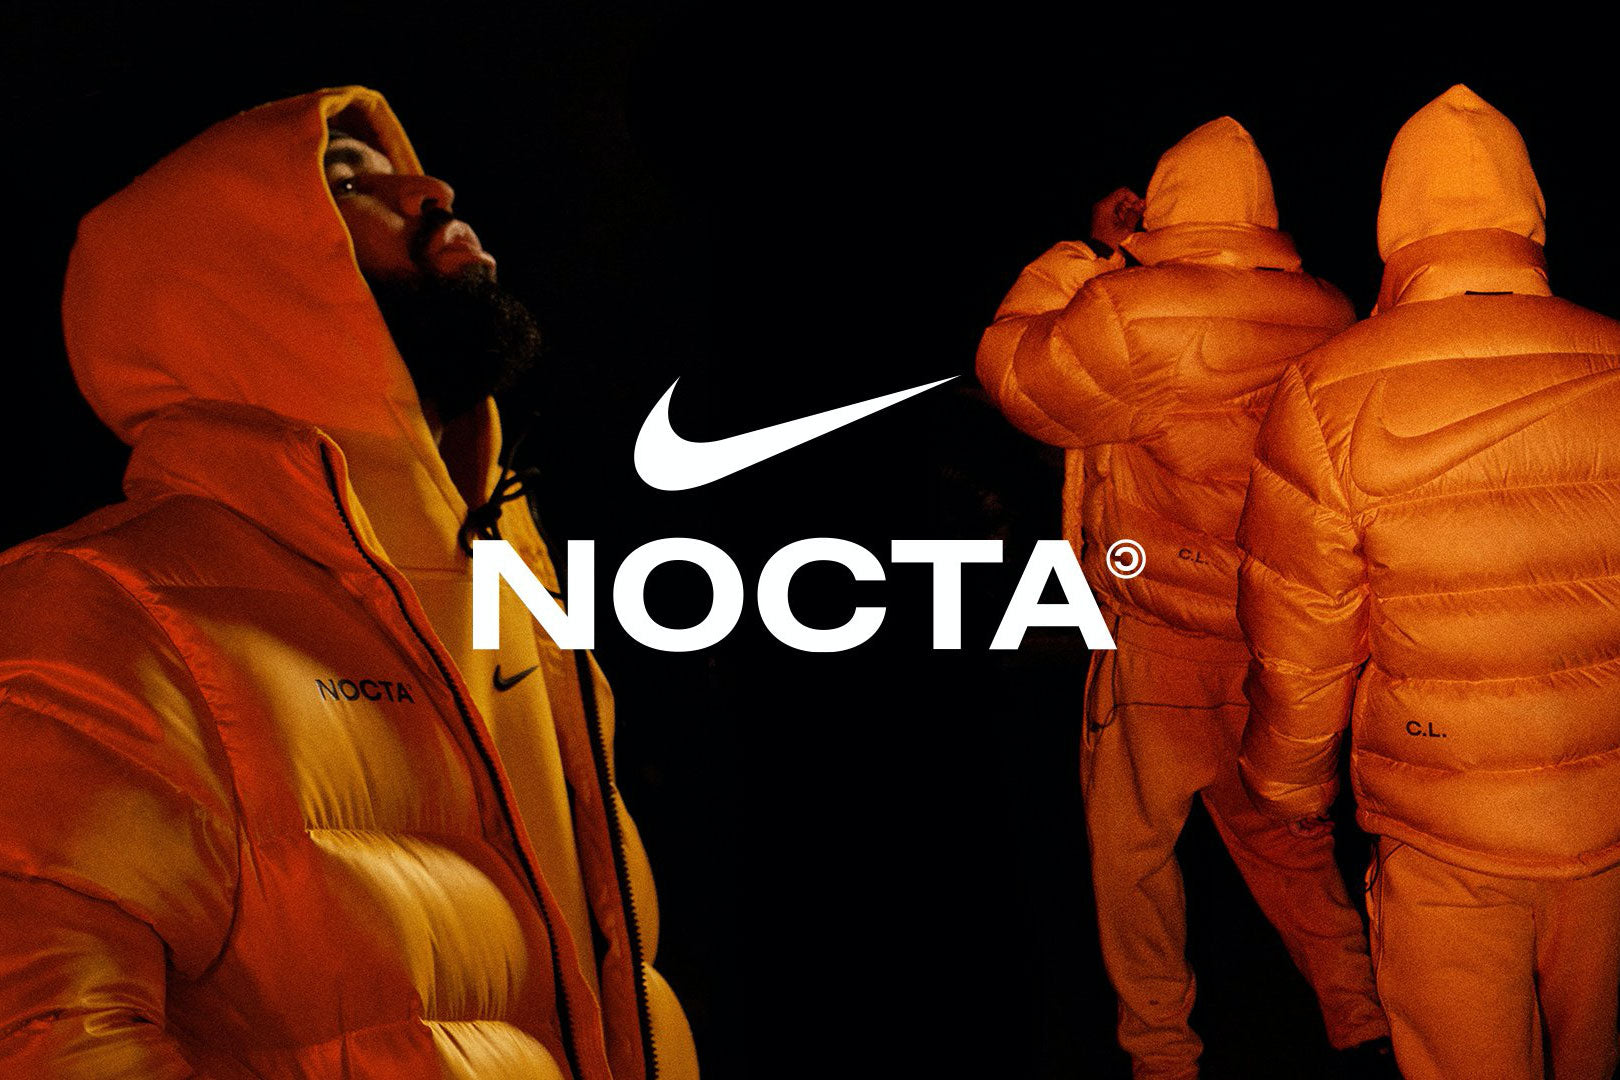 Introducing NOCTA, From Nike 19/12/20